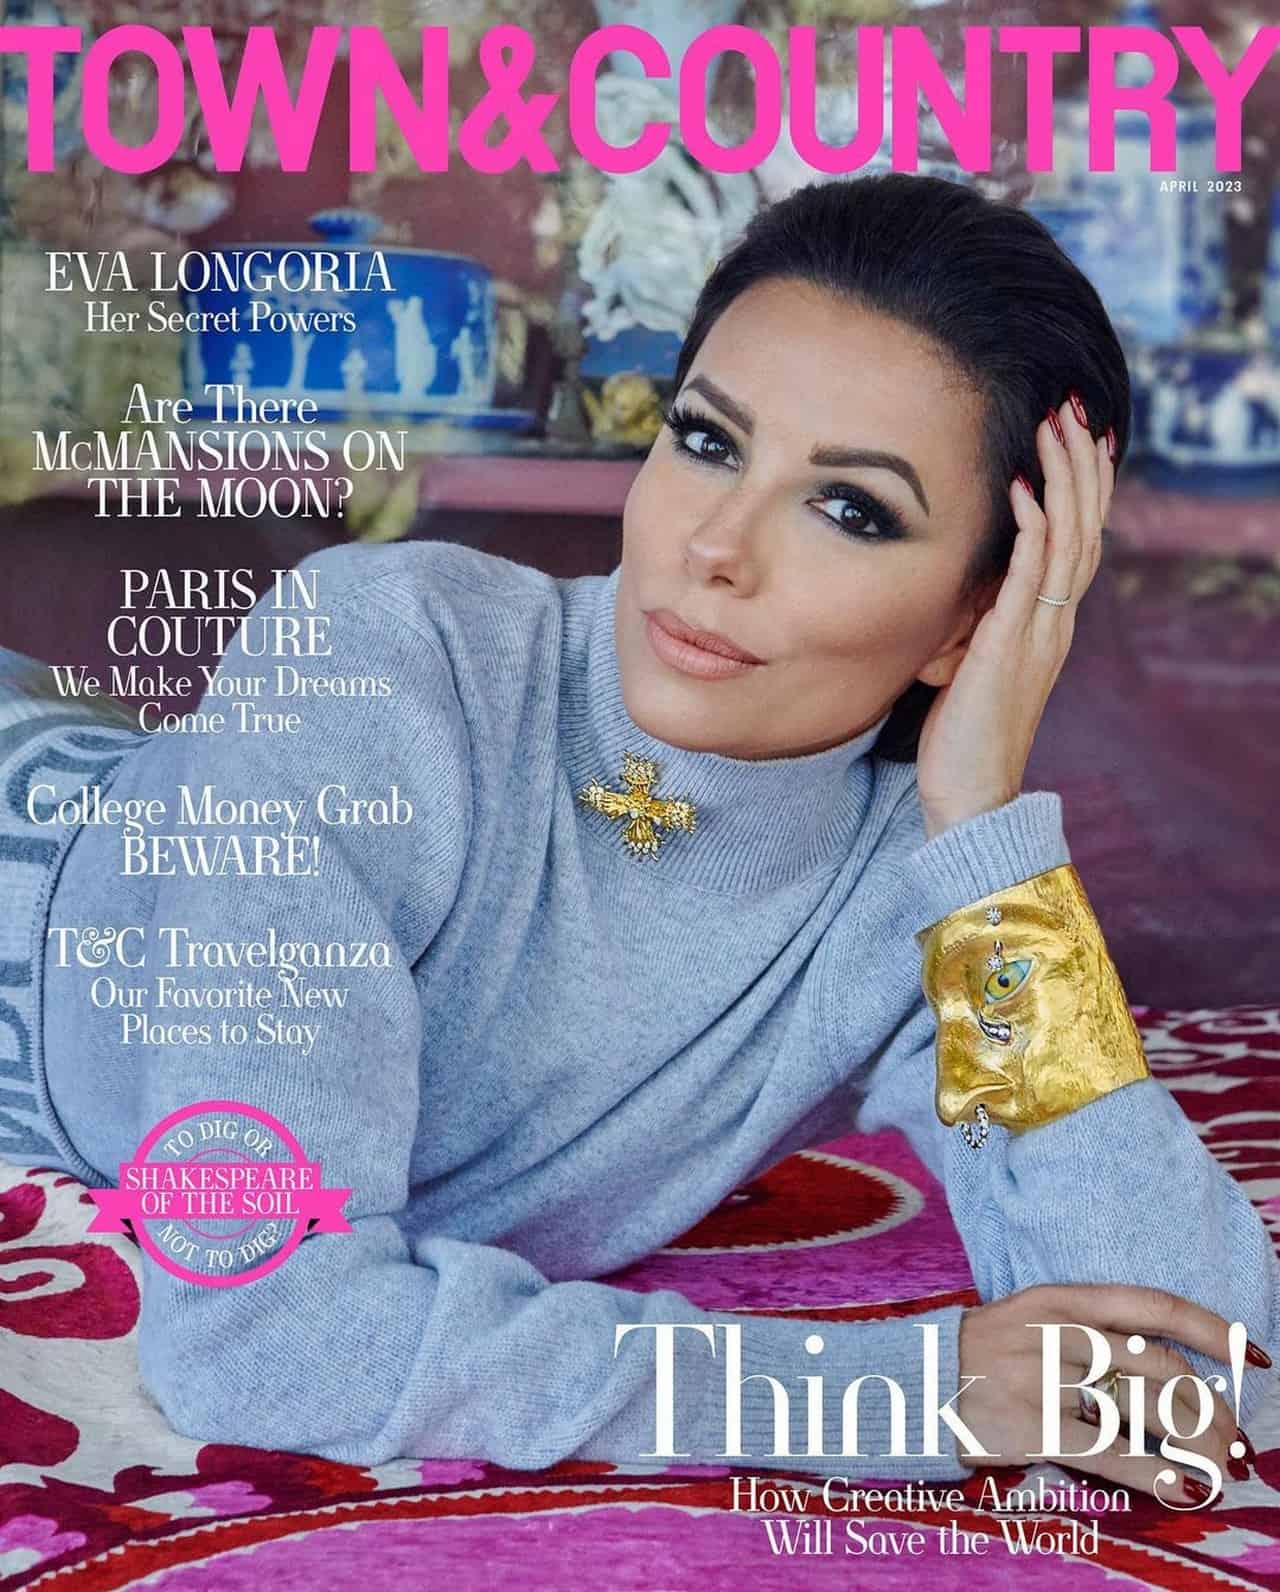 Eva Longoria is the Cover Star of “Town & Country” April 2023 Issue